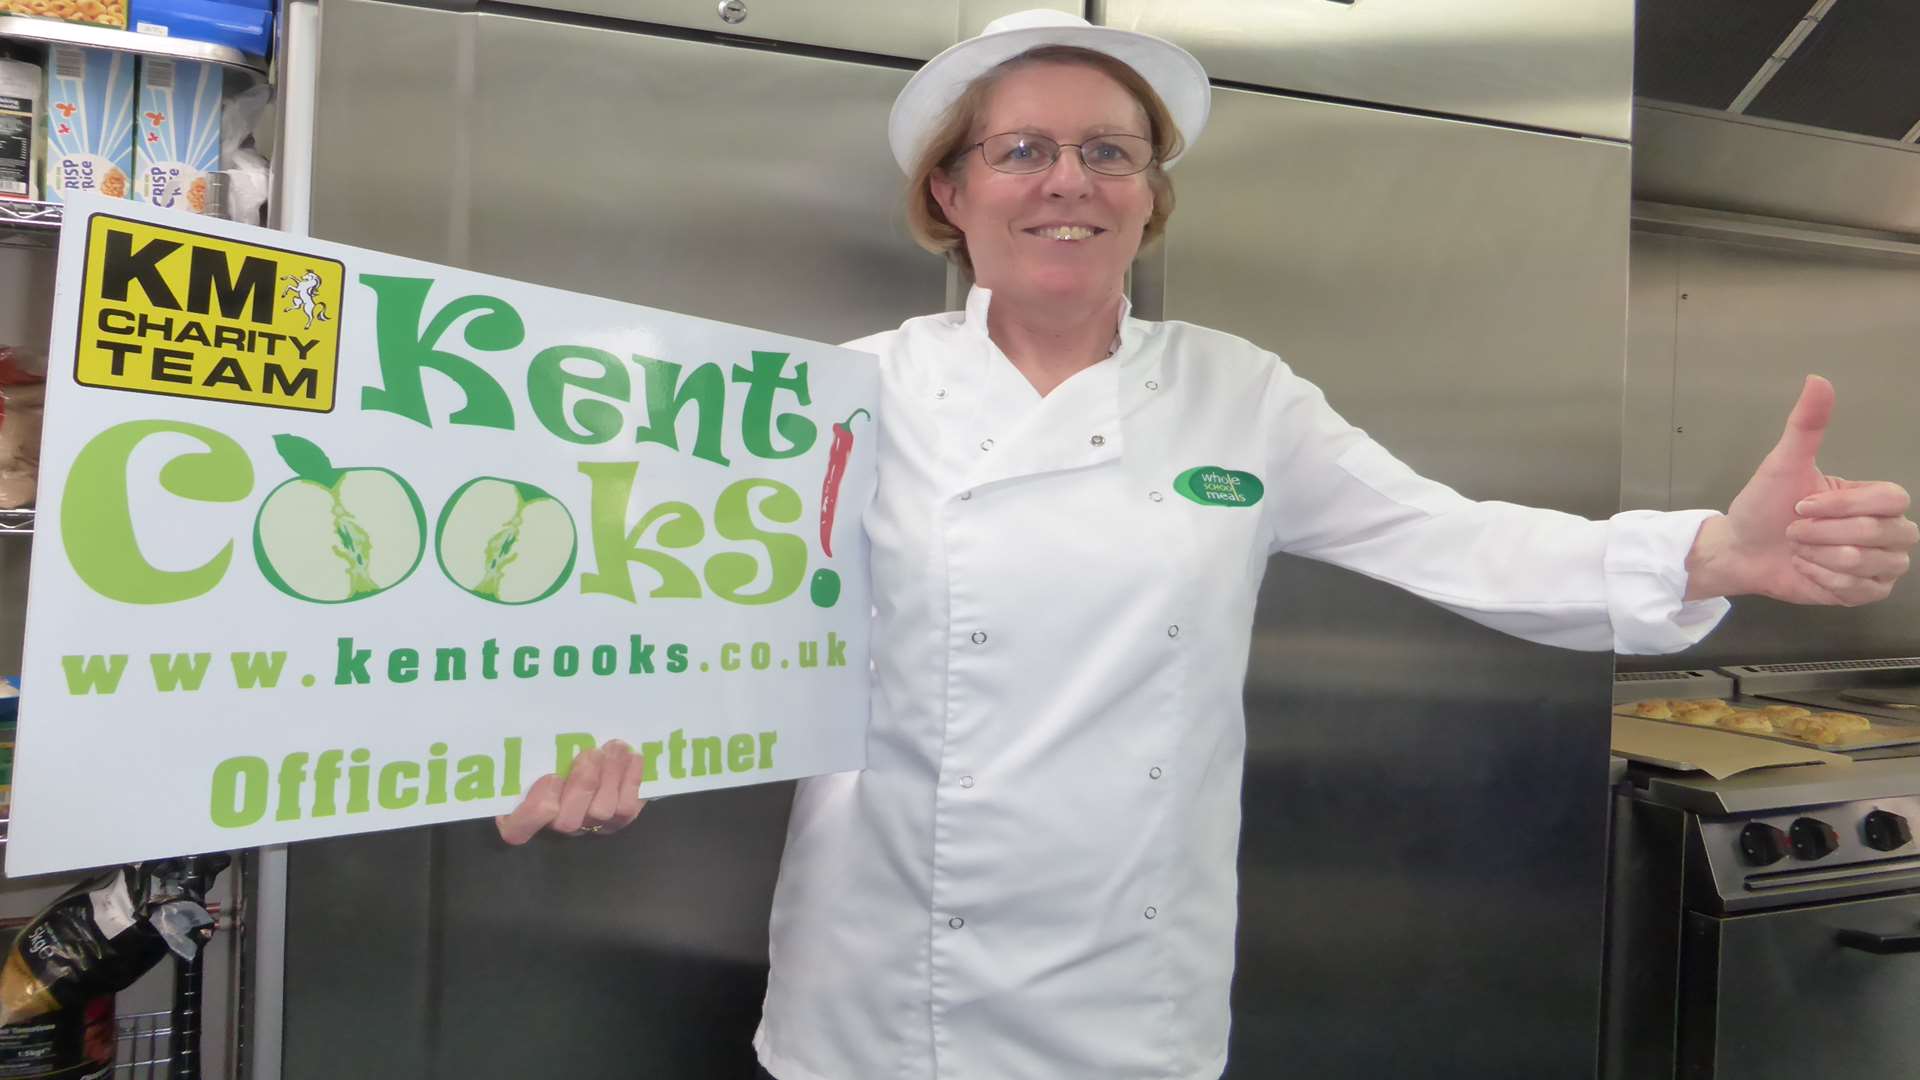 Karolyn Morgan of Whole School Meals, Betteshanger near Deal, becomes a corporate ambassador for Kent's official school cookery contest: Kent Cooks.